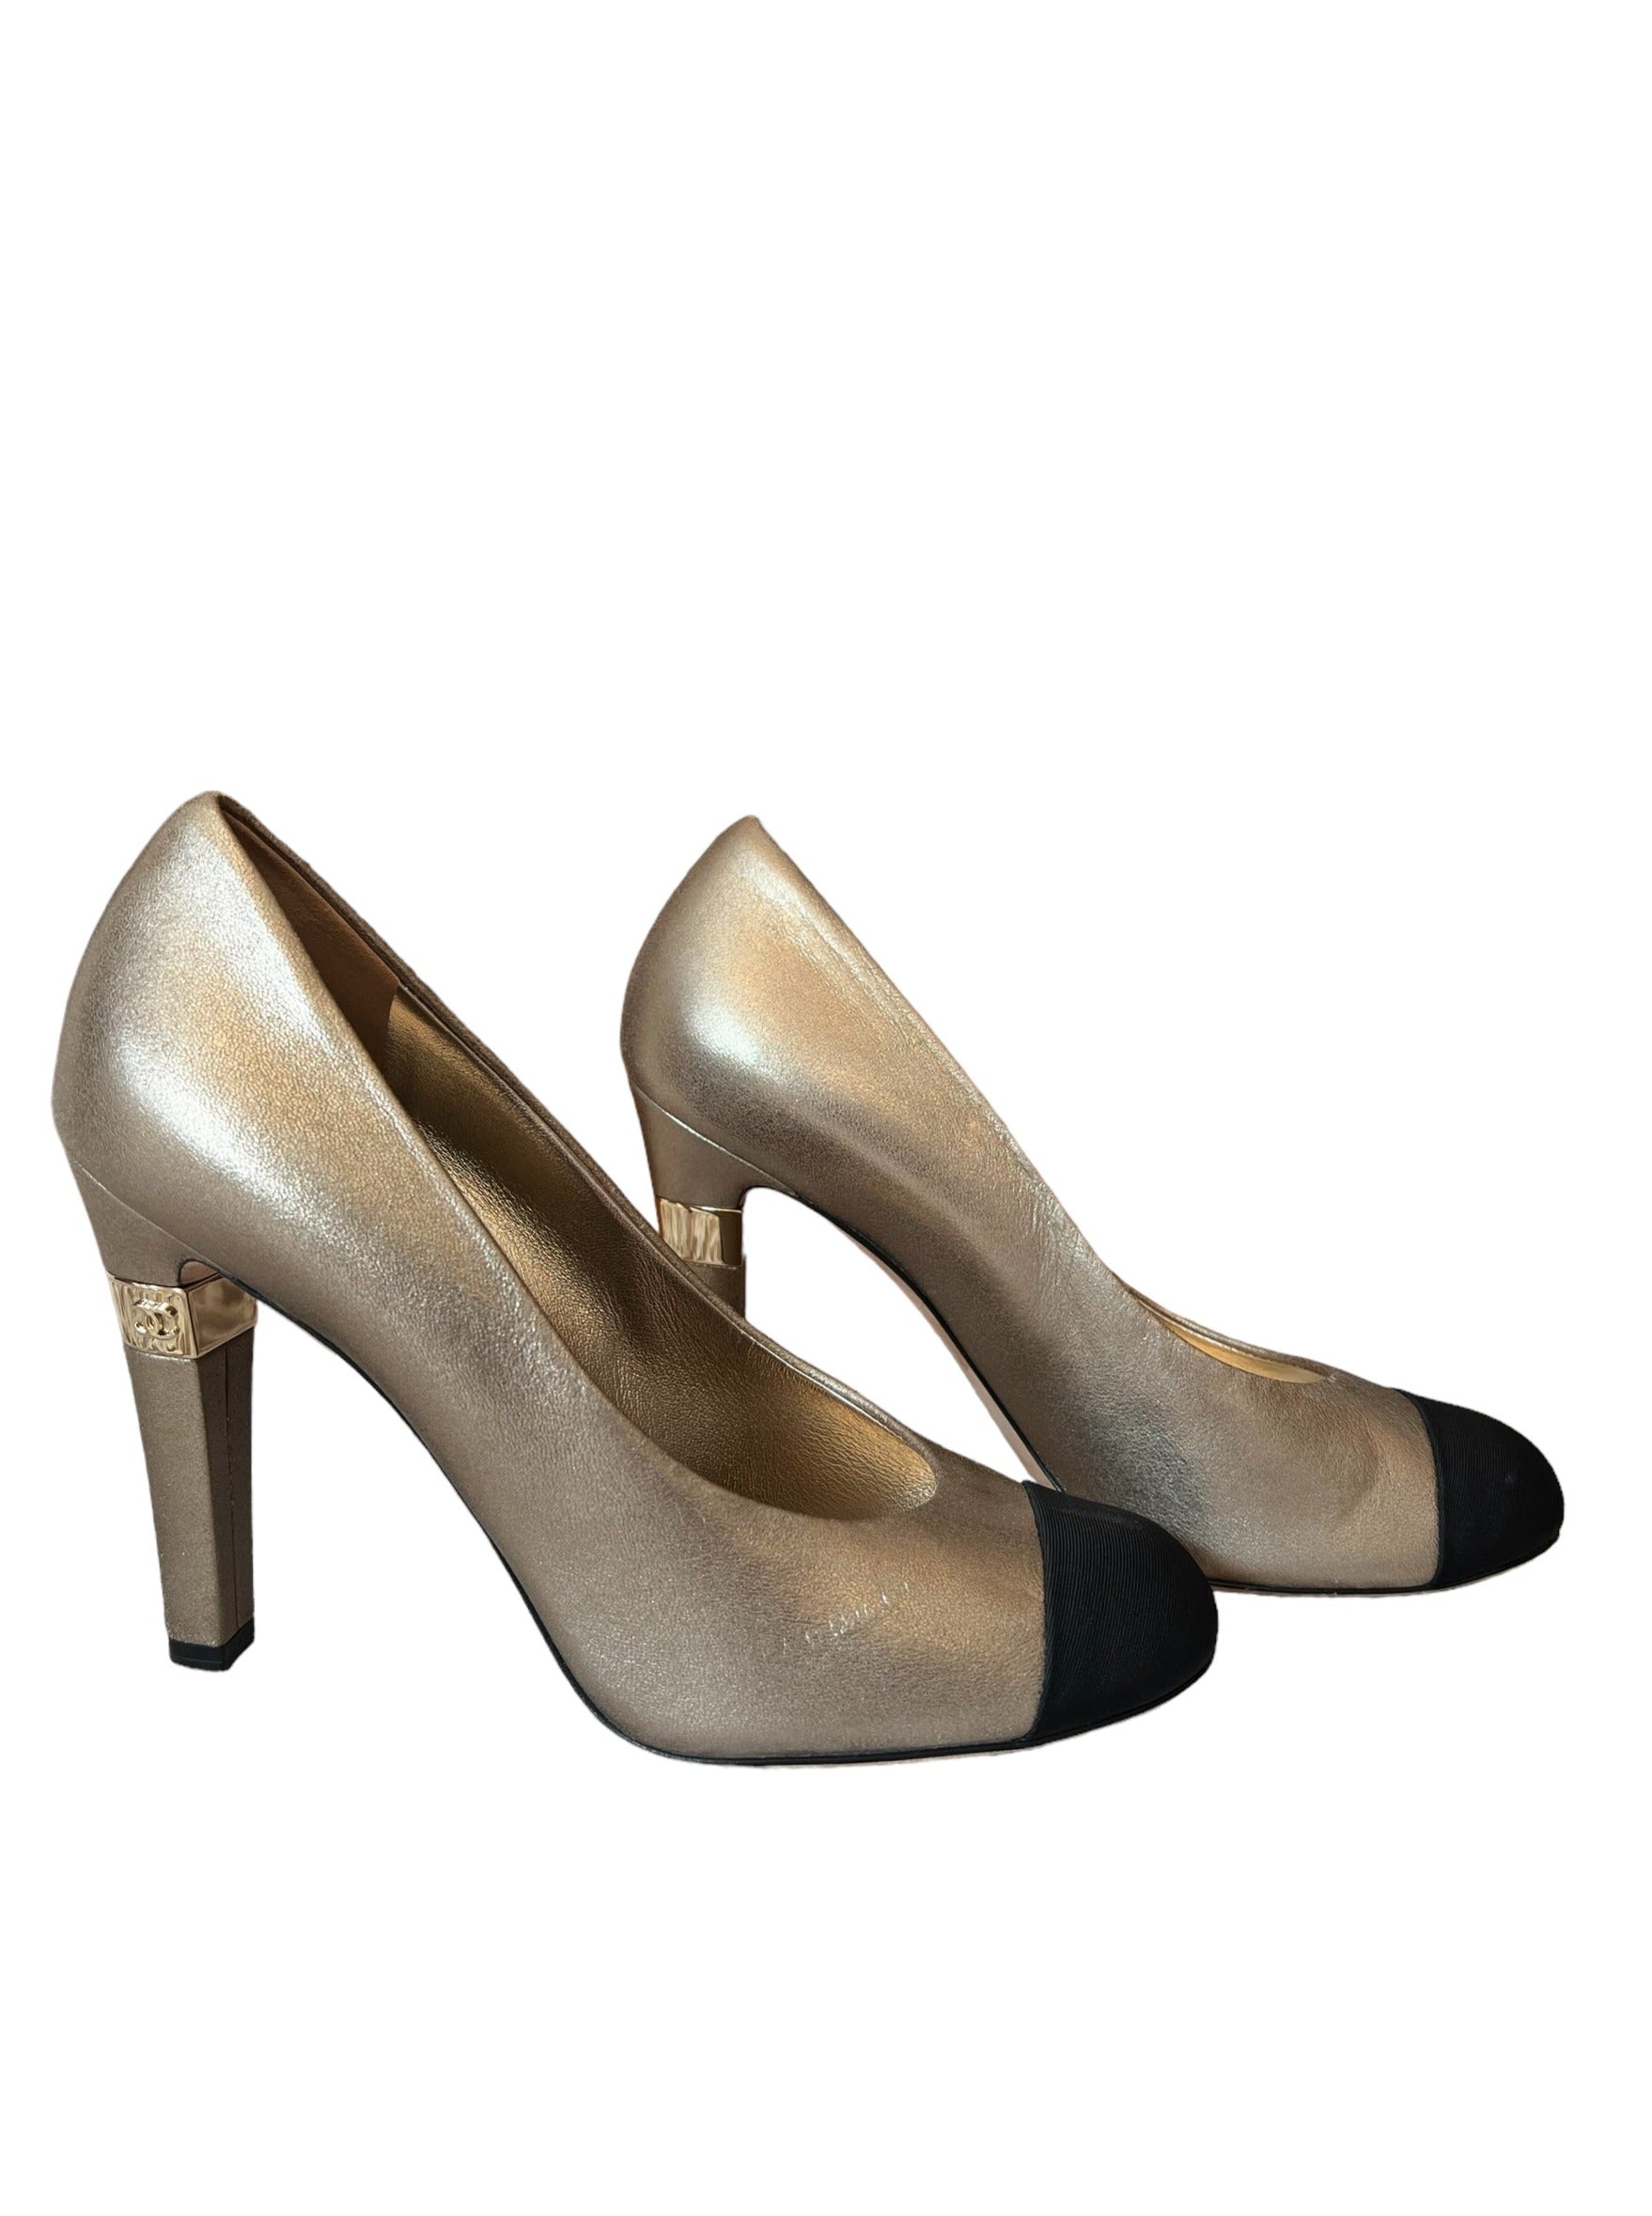 Chanel Cap toe heels with metallic gold leather and metal heel accent with cap toe shoe and  escarpins